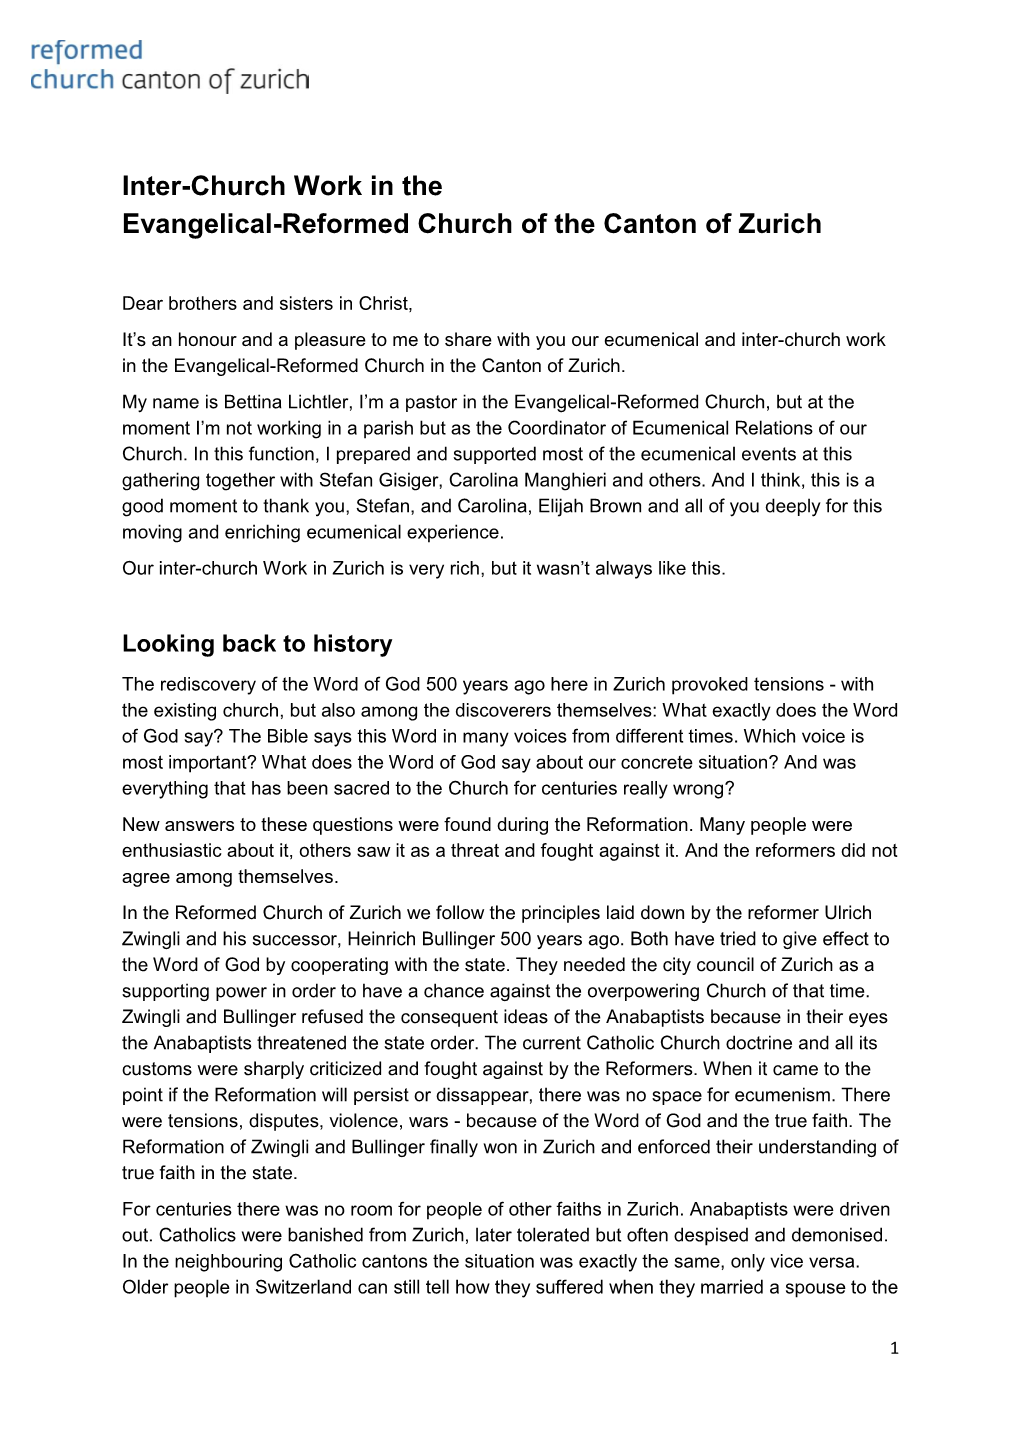 Inter-Church Work in the Evangelical-Reformed Church of the Canton of Zurich